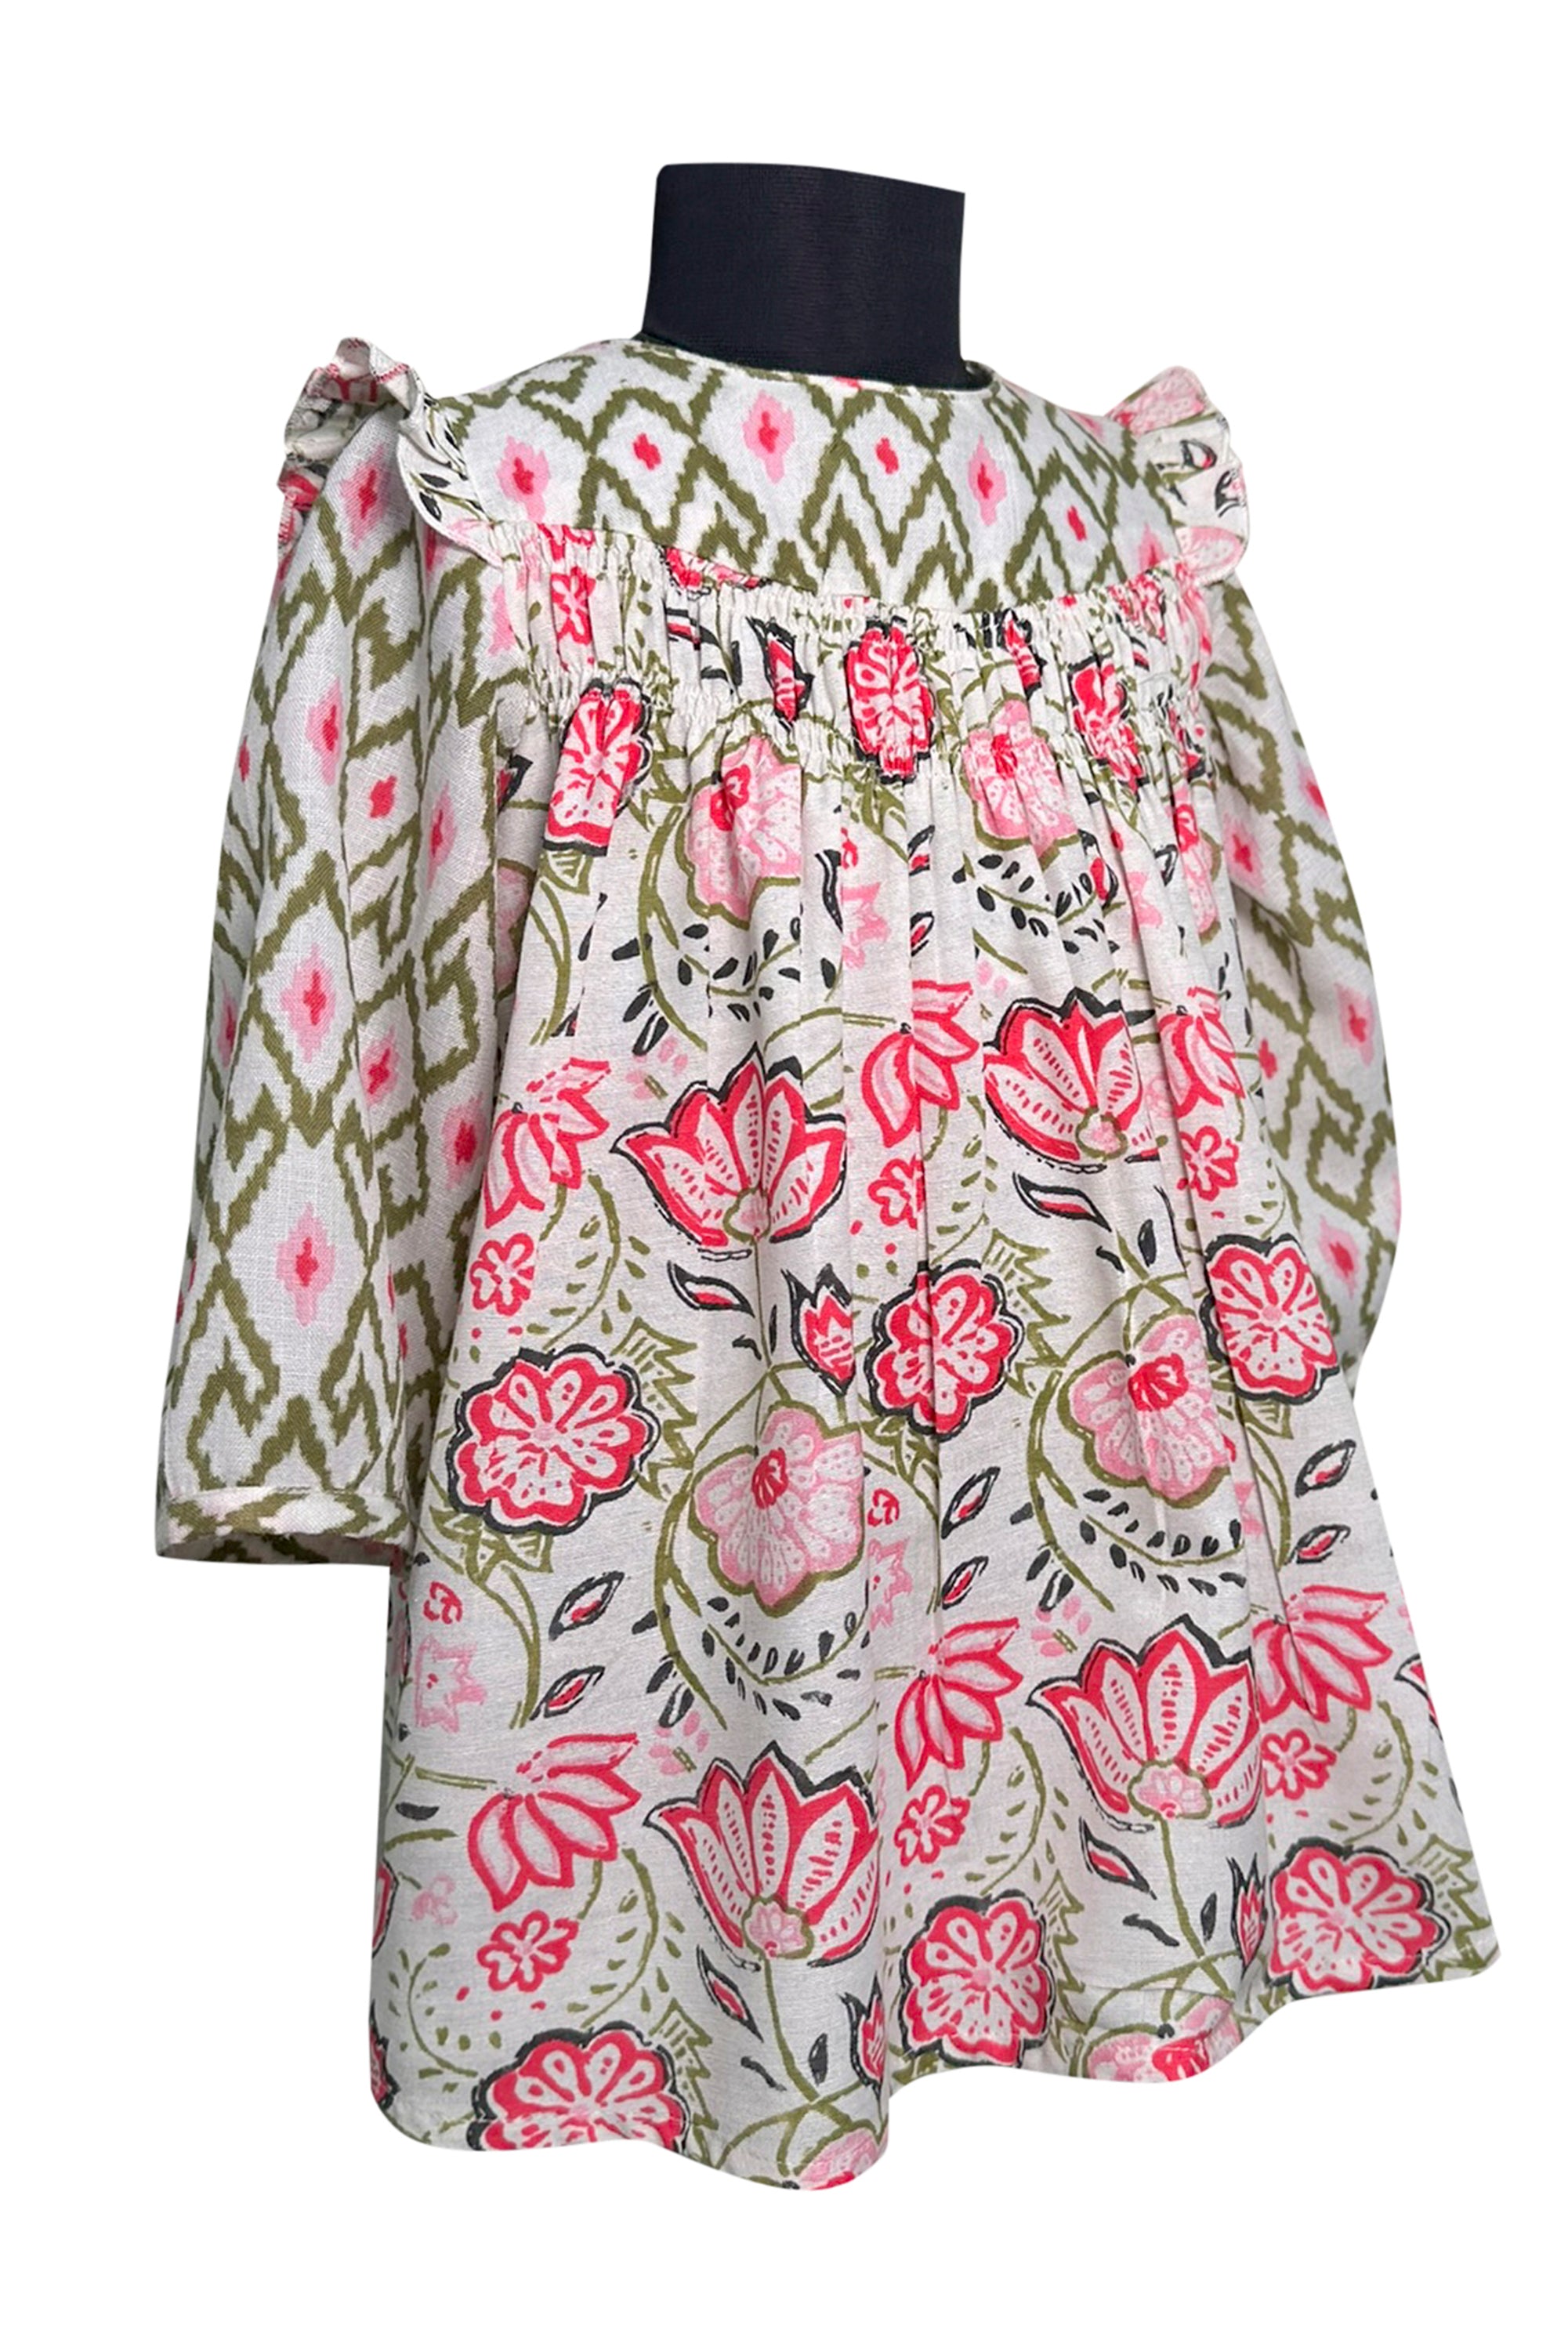 Printed Full Sleeves Dress with Ruffles